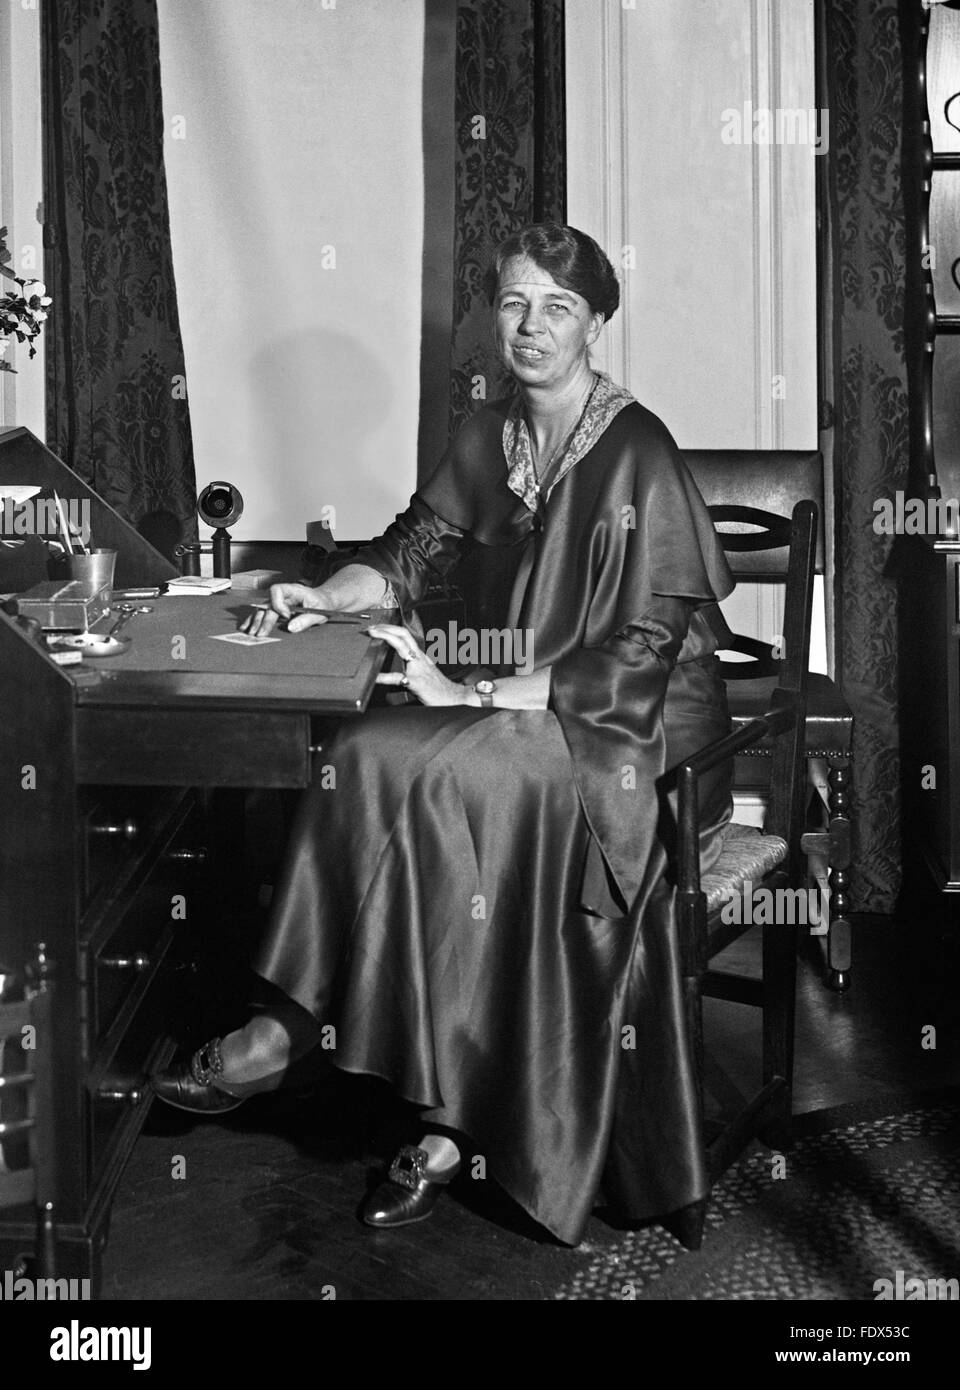 Eleanor Roosevelt (1884-1962), wife of Franklin D Roosevelt, the 32nd President of the USA. Portrait by Harris & Ewing, c.1932 Stock Photo